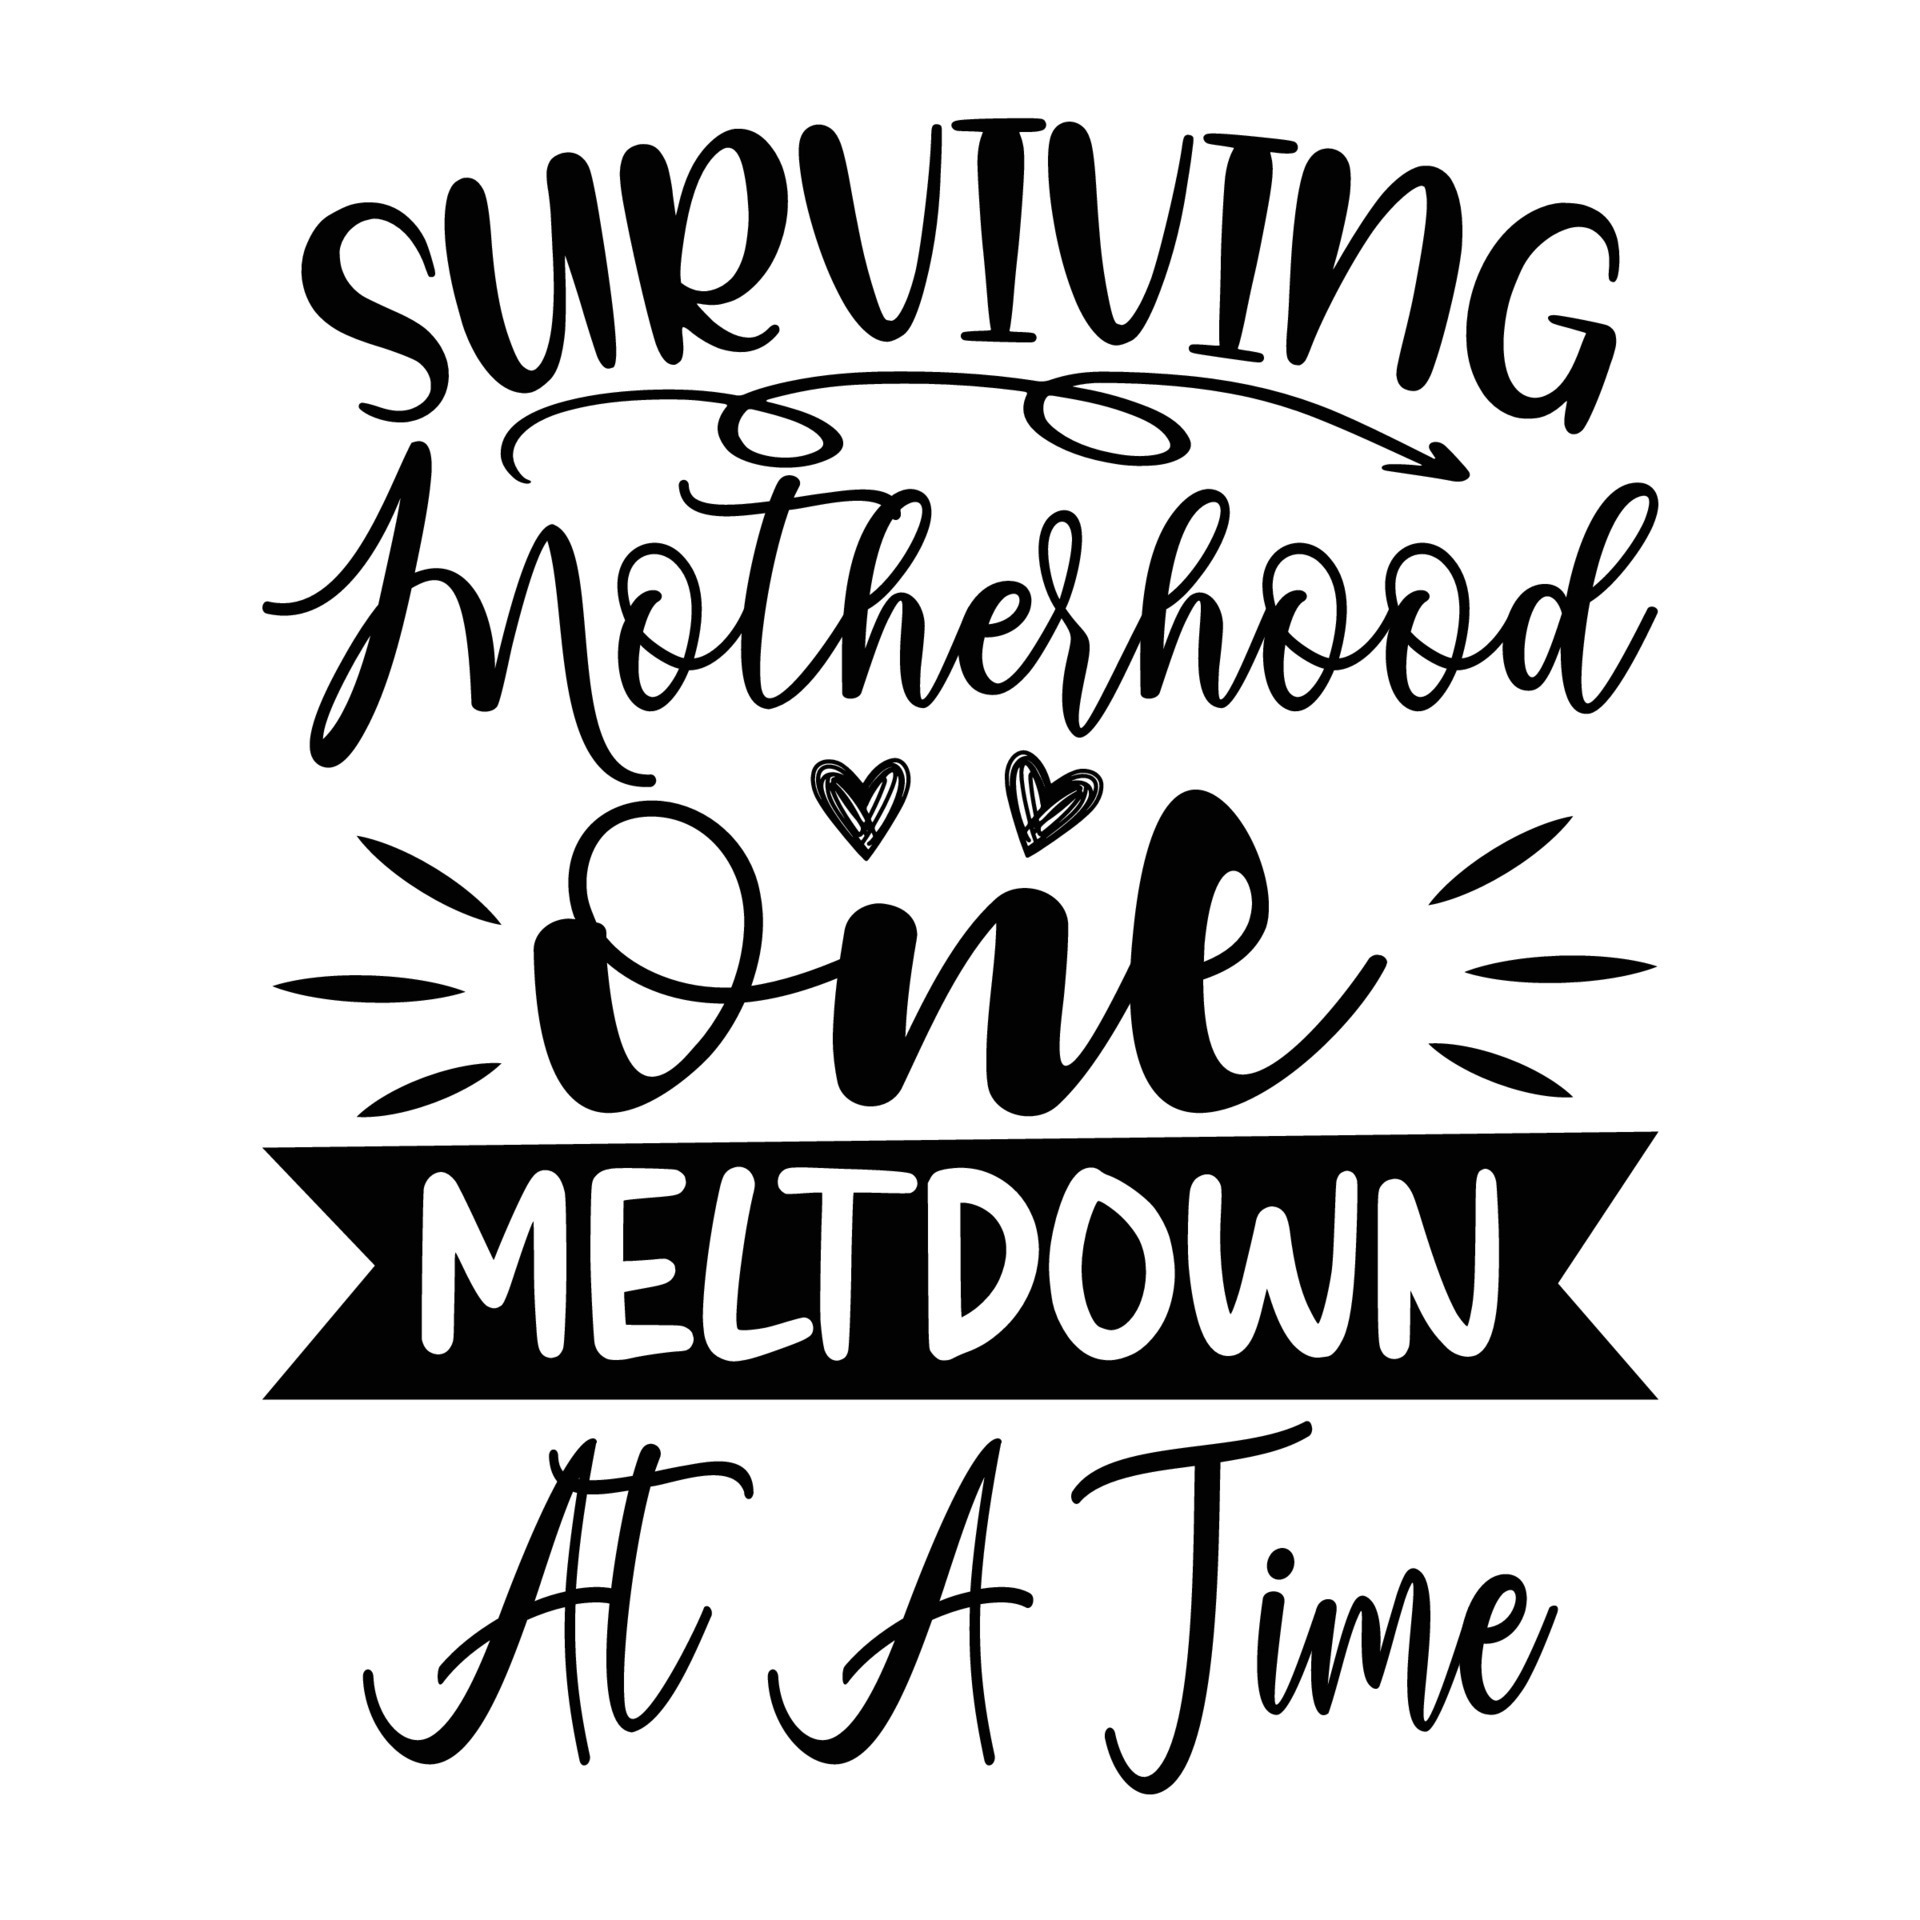 surviving motherhood one meltdown at a time, Mother's day shirt print ...